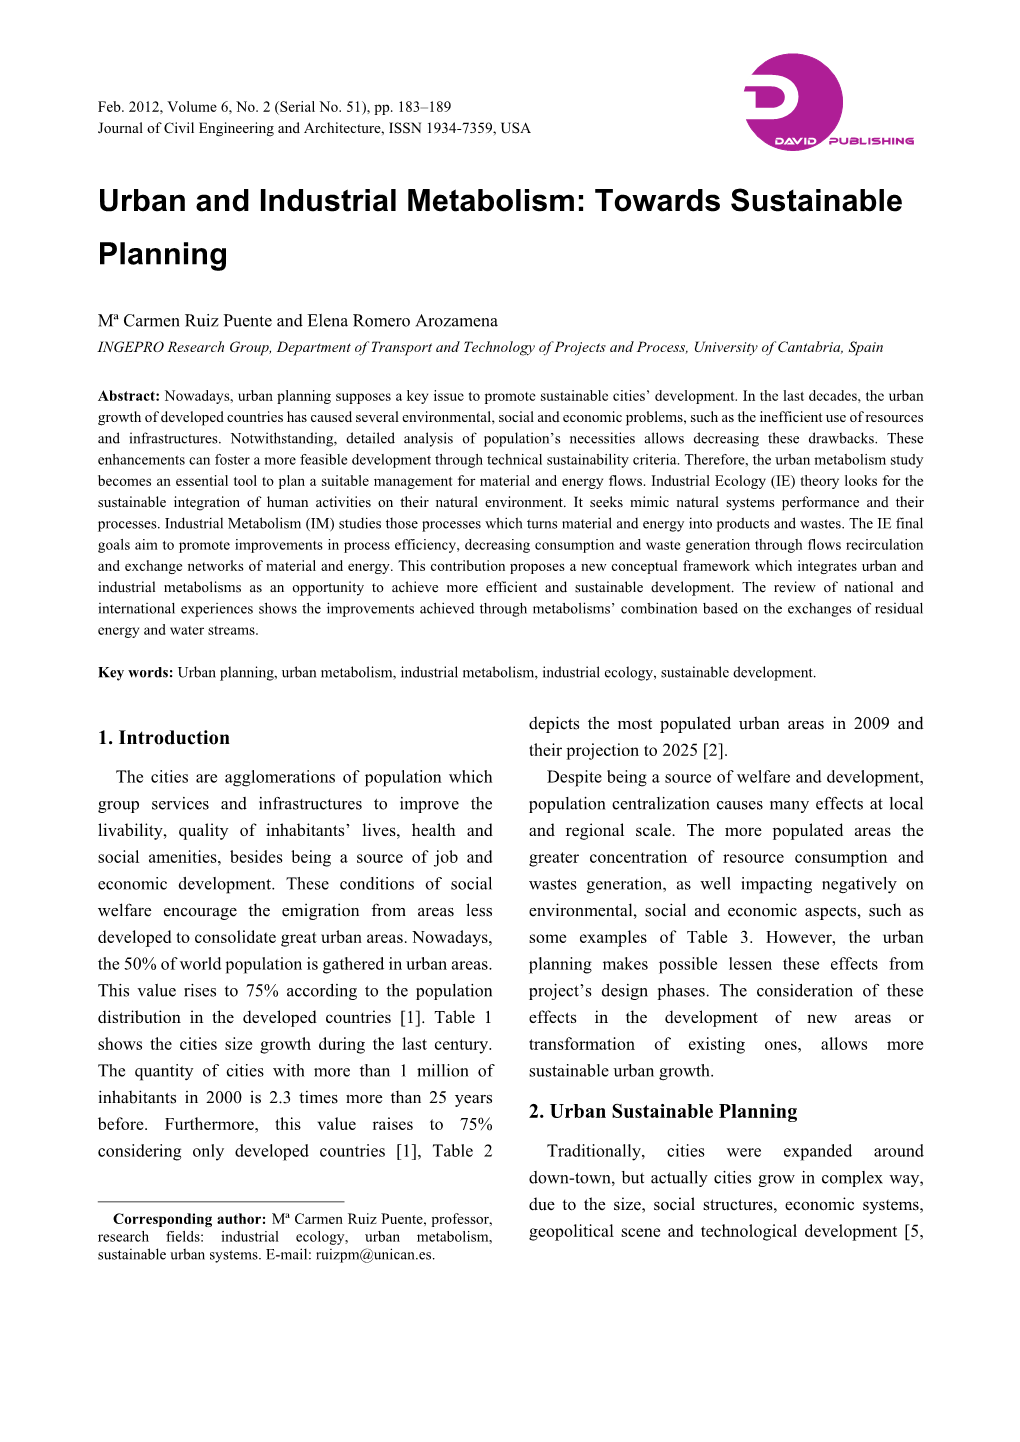 Urban and Industrial Metabolism: Towards Sustainable Planning